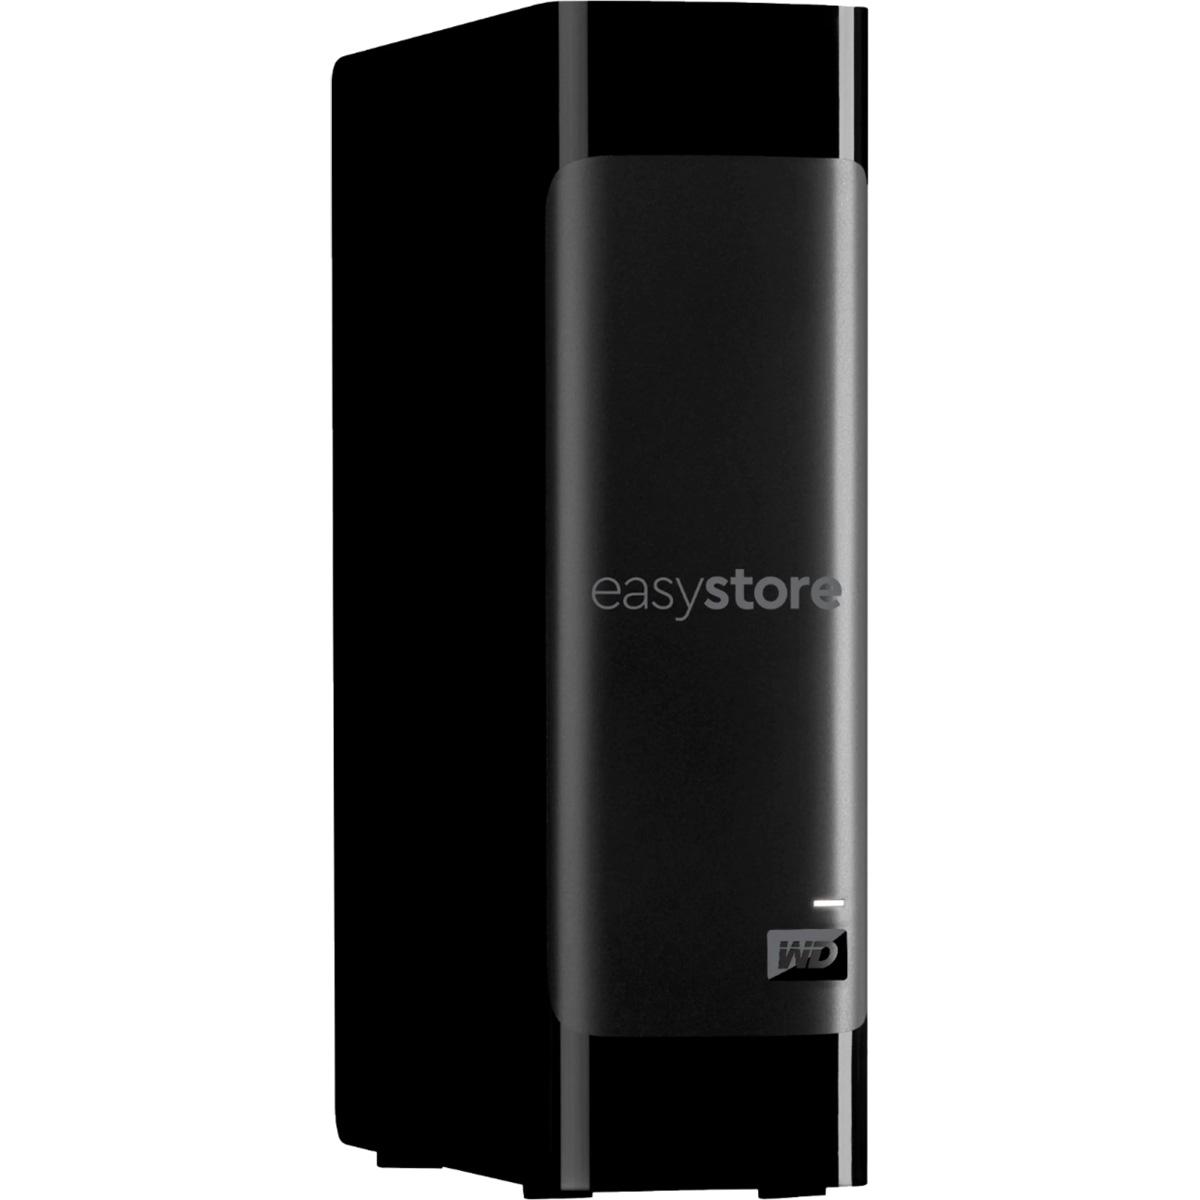 WD easystore 14TB External USB 3.0 Hard Drive for $227.99 Shipped